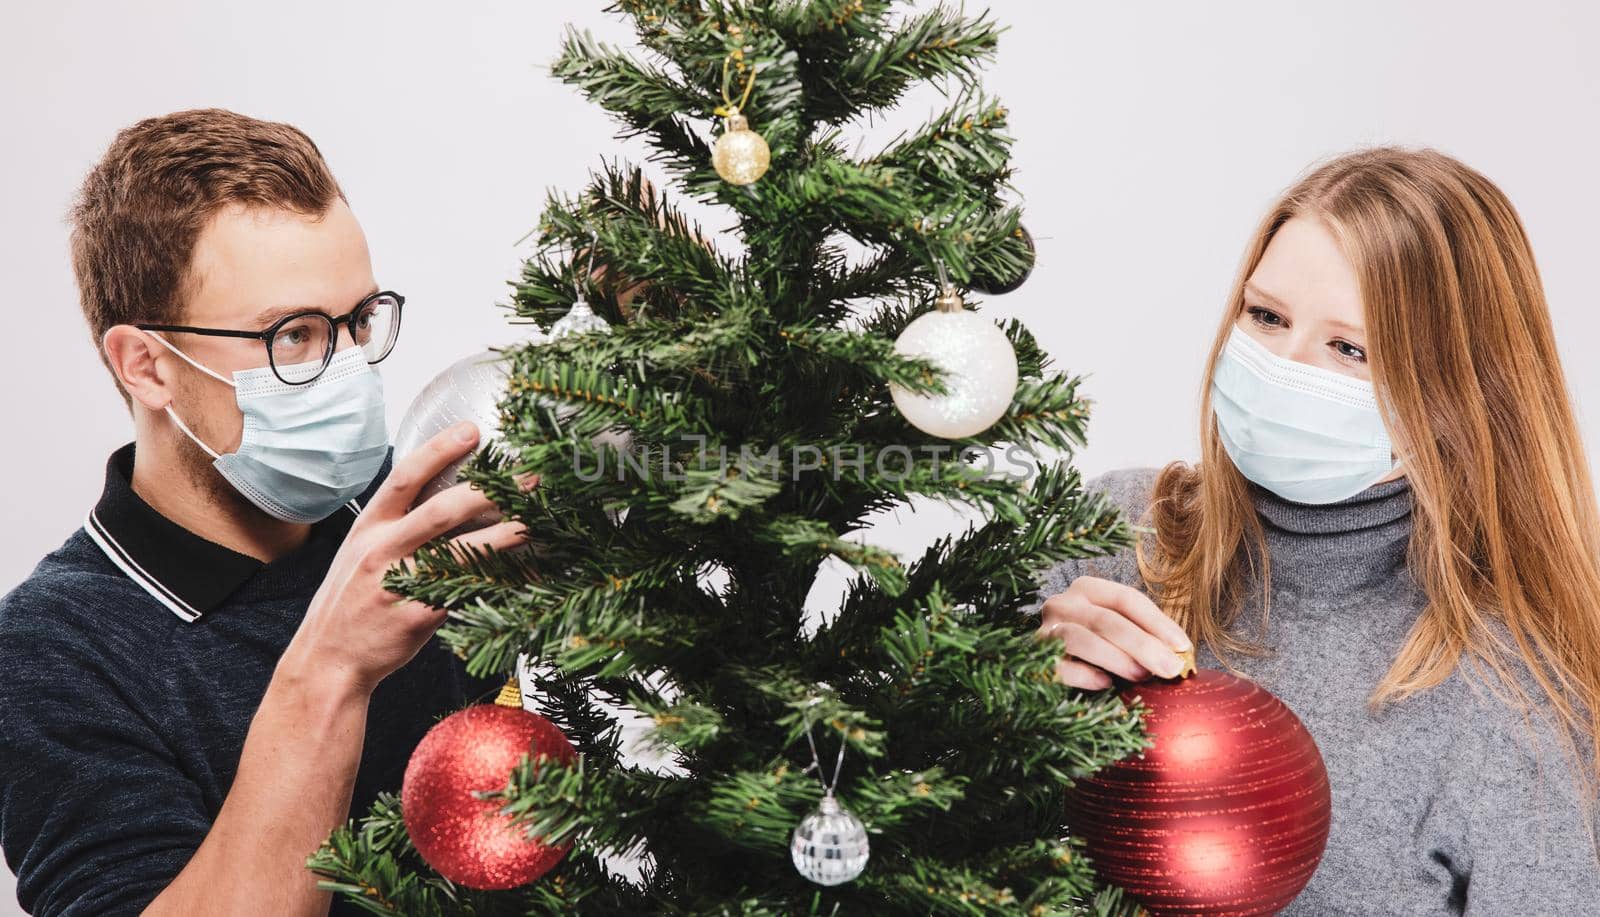 Couple decorating the Christmas tree wearing covid-19 face mask by Kzenon